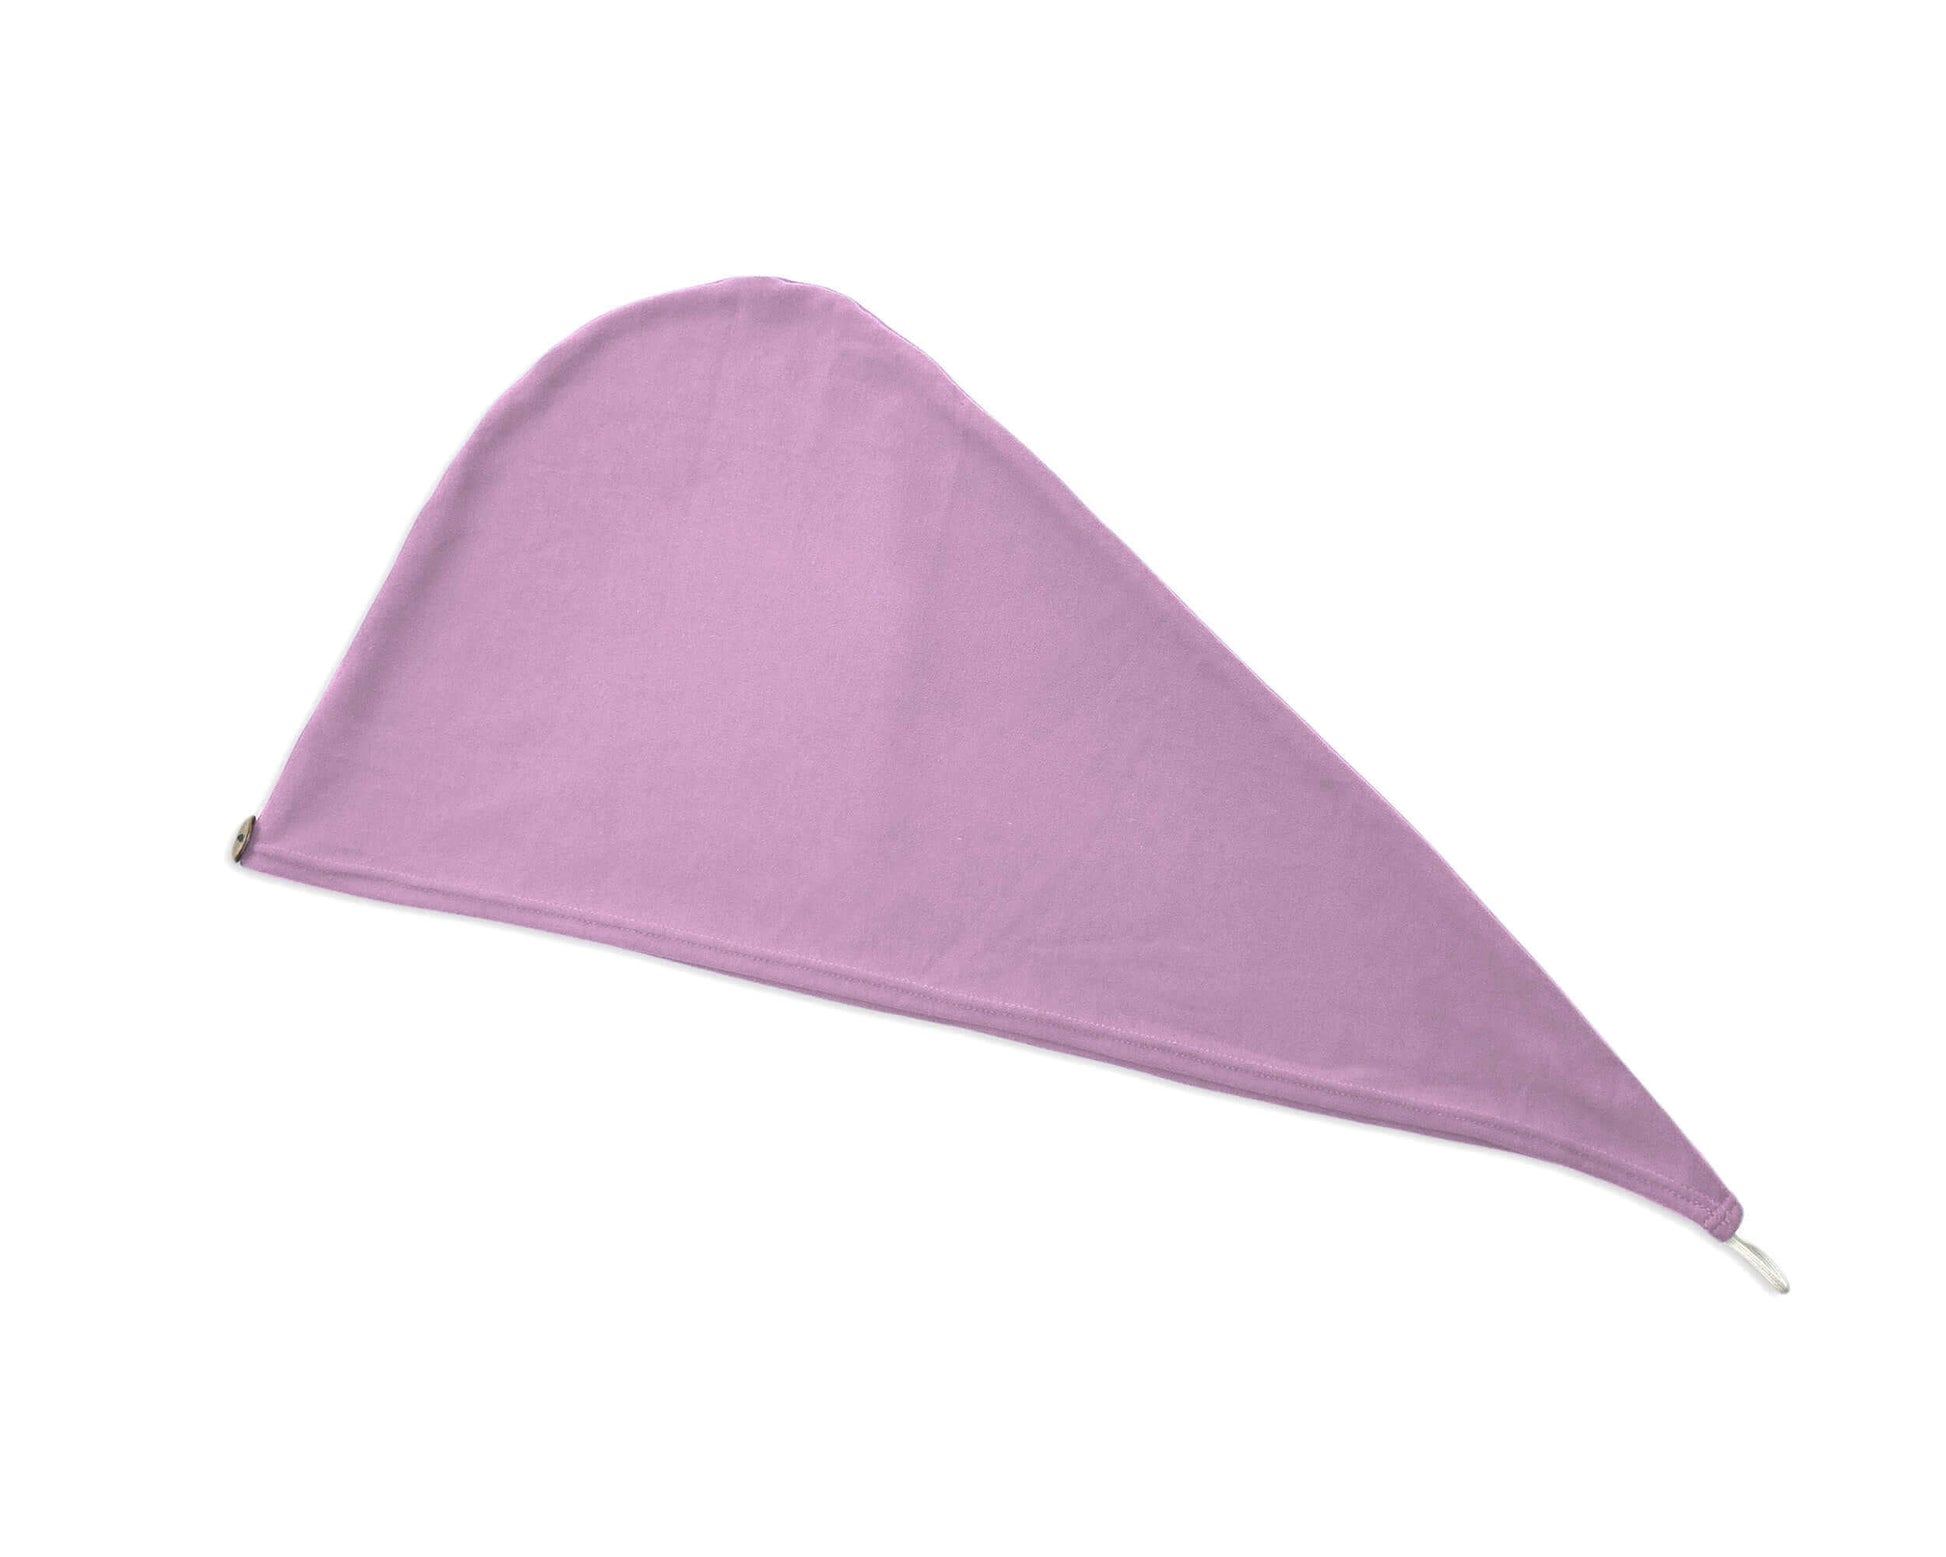 T-Shirt Hair Towel Hood for Curly, Wavy, and Straight Hair - Soft, Absorbent, and Eco-Friendly - Pastel Lilac